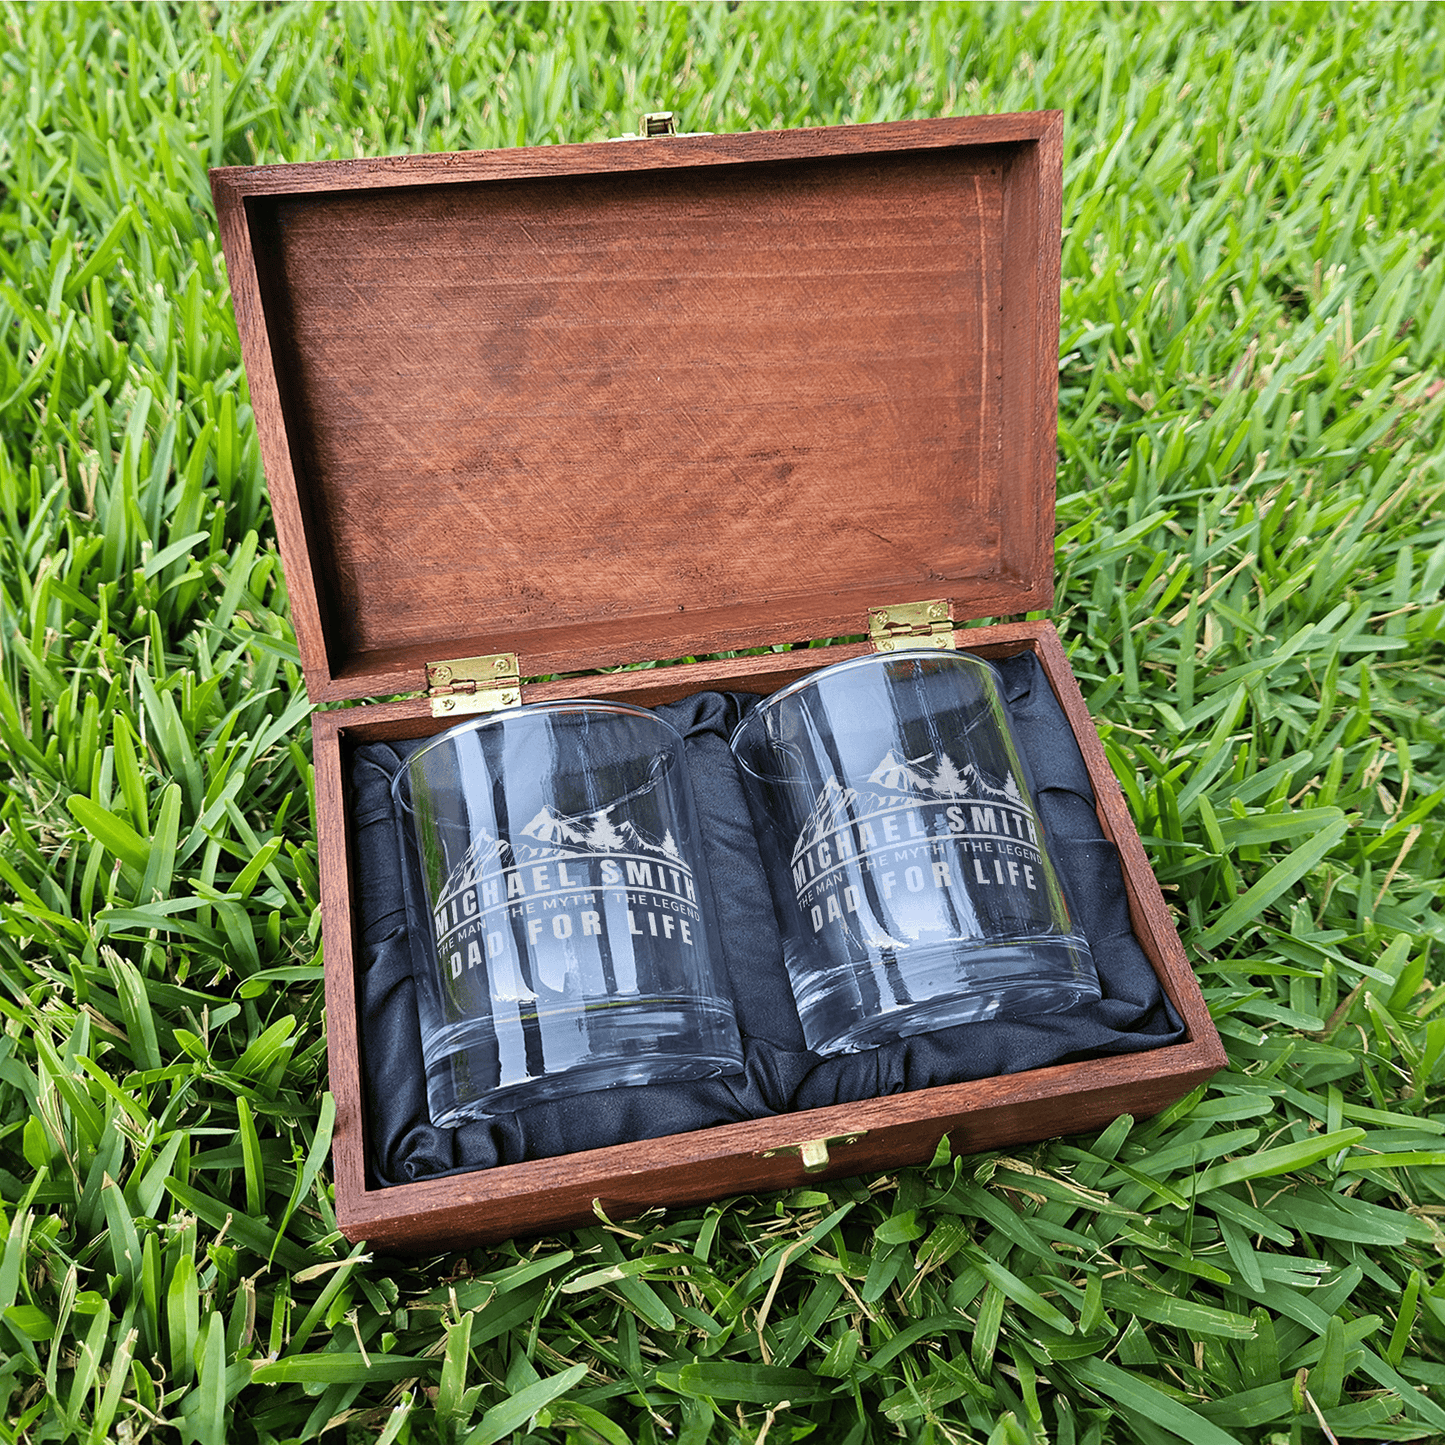 Personalized Whiskey Glasses Set with Wooden Box - Perfect Gift for the Outdoor Dad -DM065